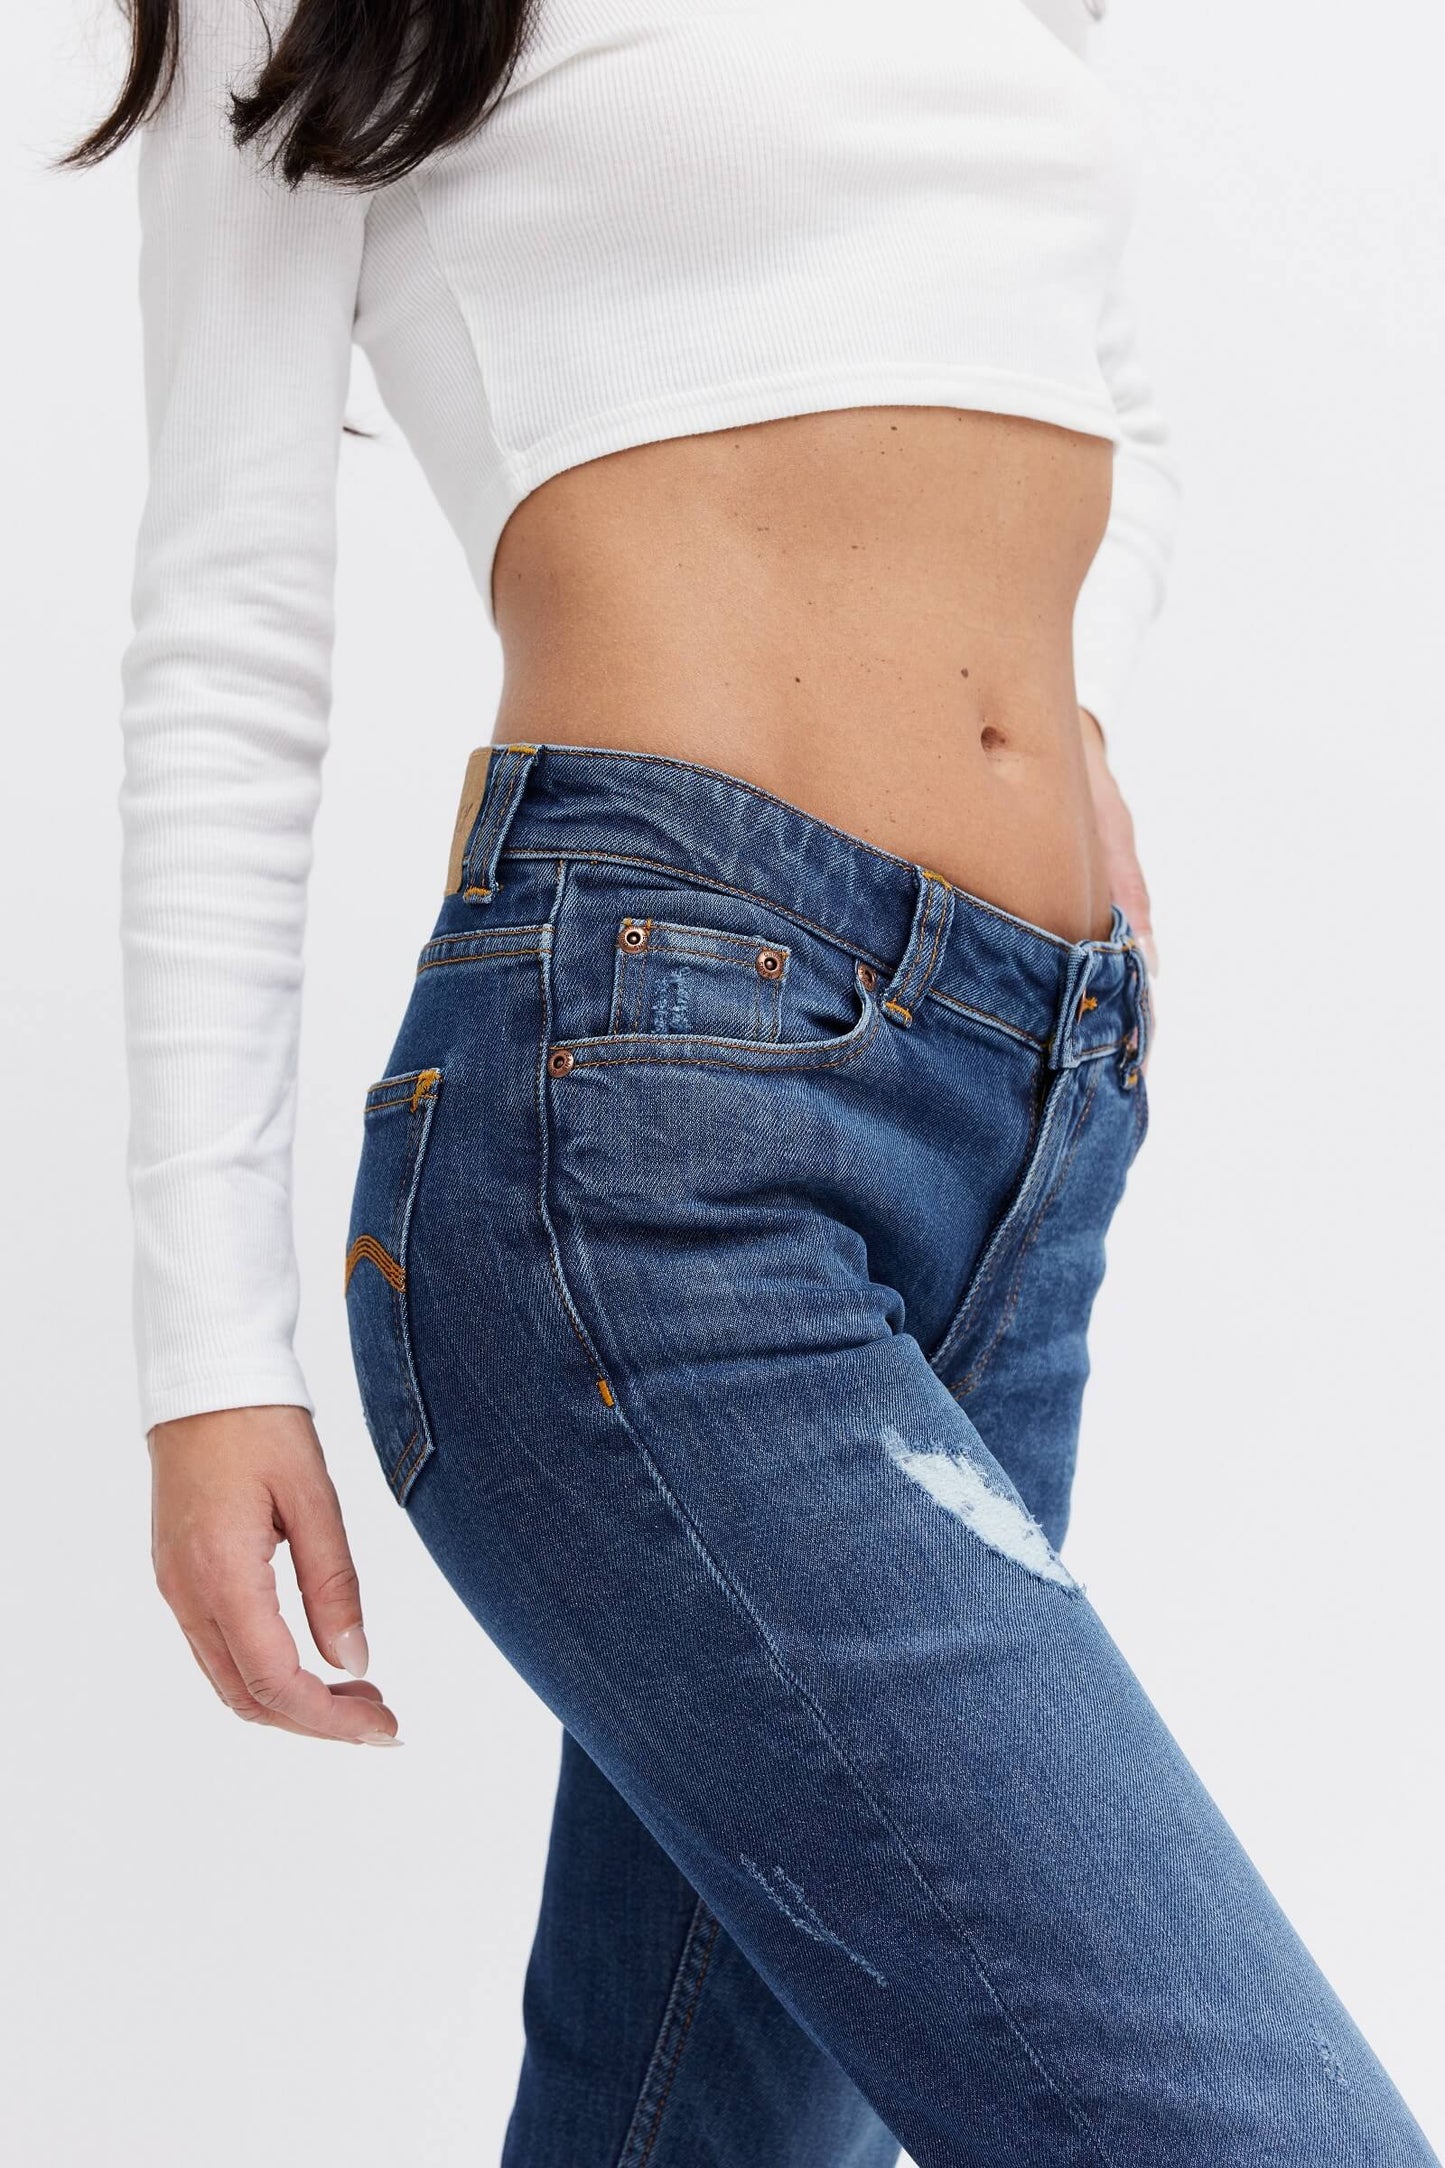 Trendy ethical jeans for women.